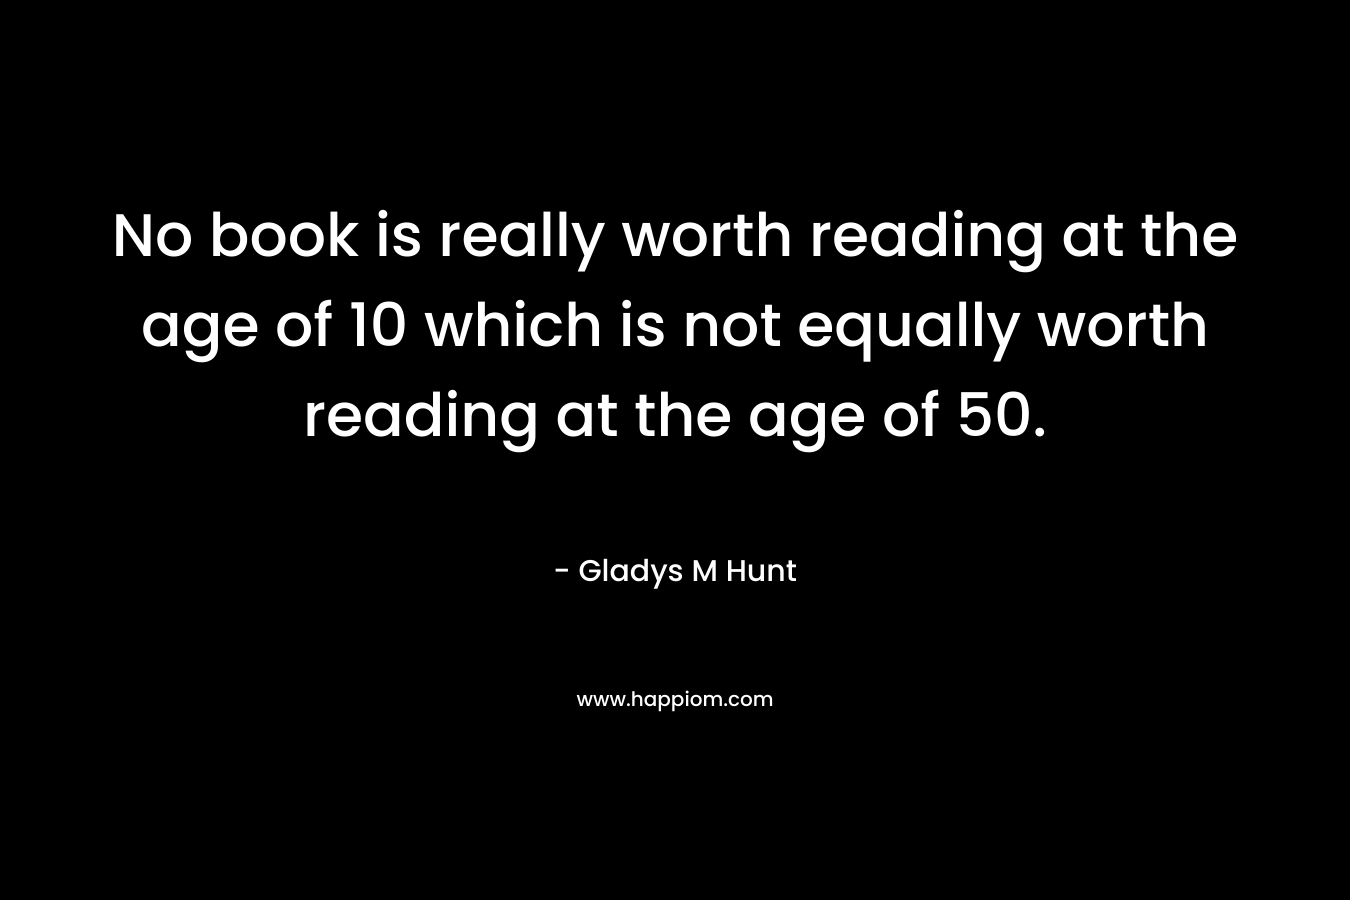 No book is really worth reading at the age of 10 which is not equally worth reading at the age of 50.